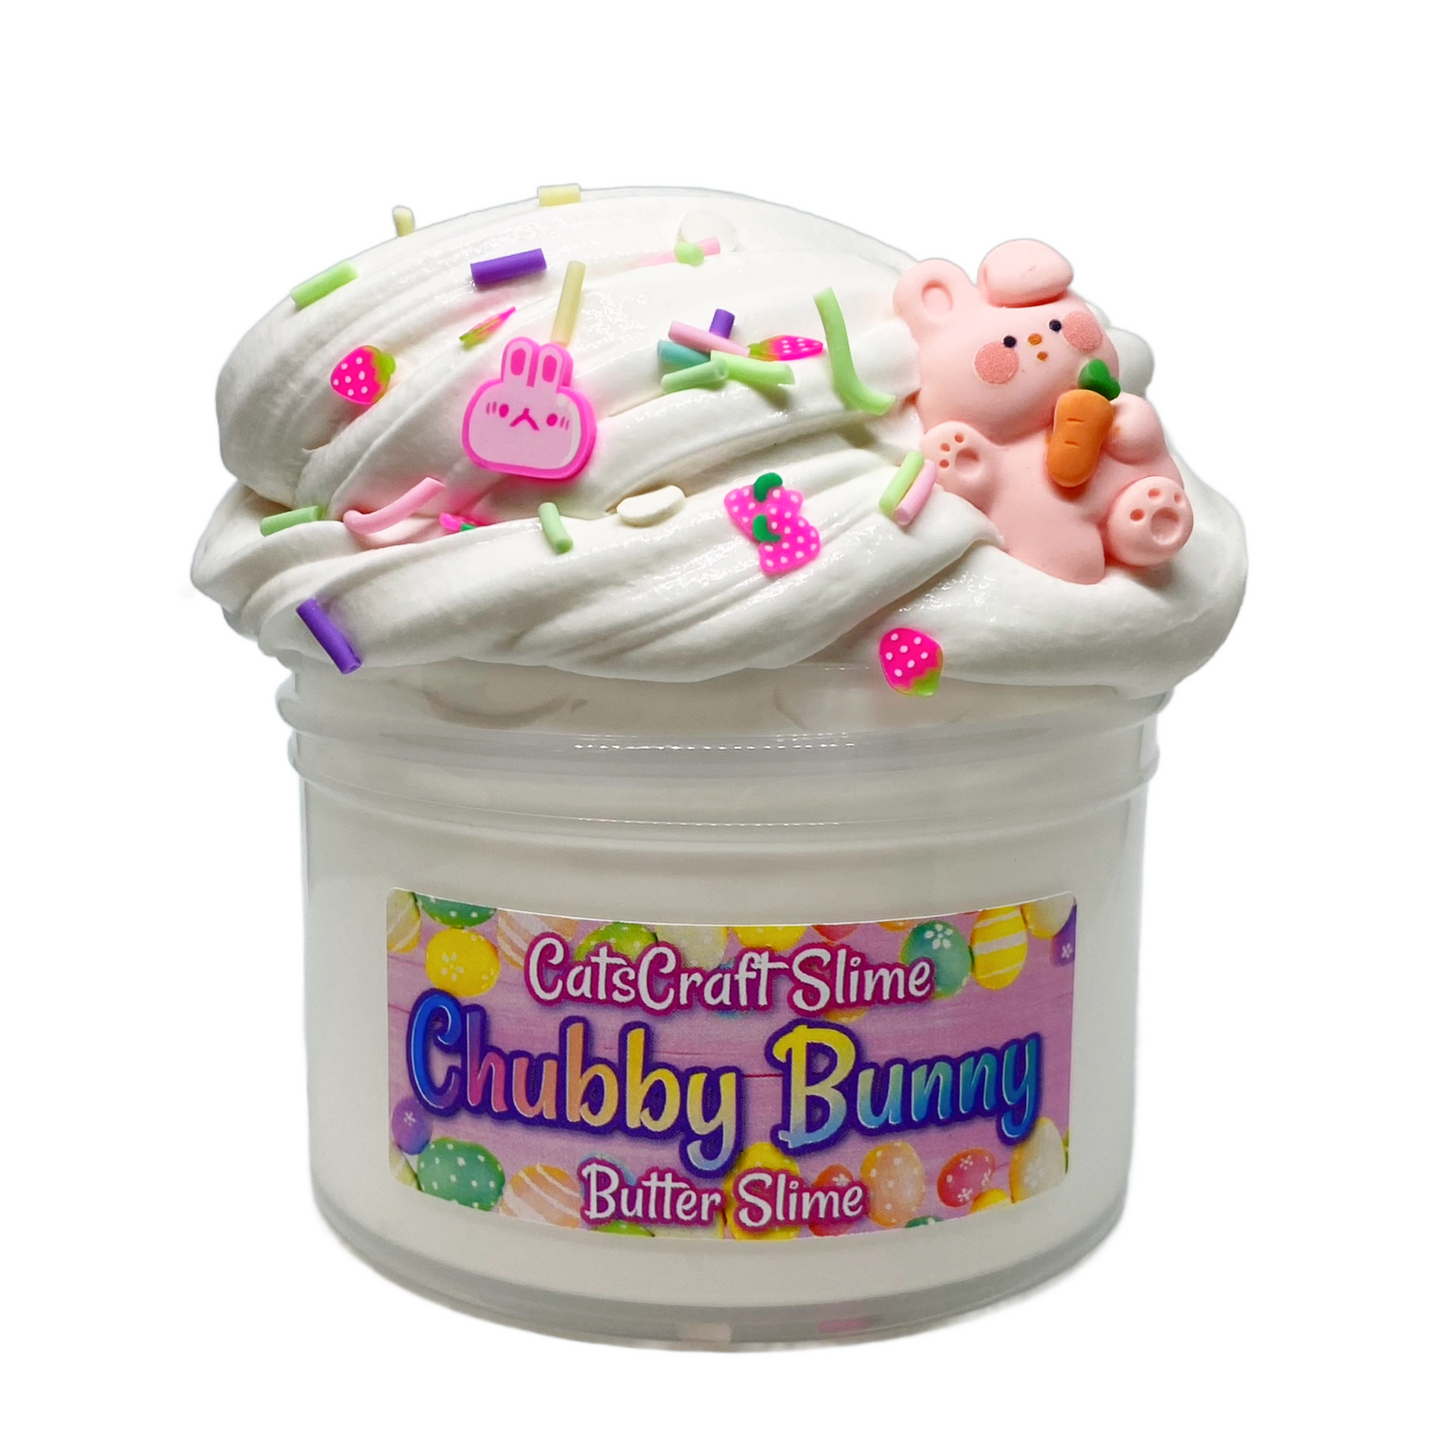 Butter Slime "Chubby Bunny" Sprinkles Scented with Charm Inflating Soft ASMR